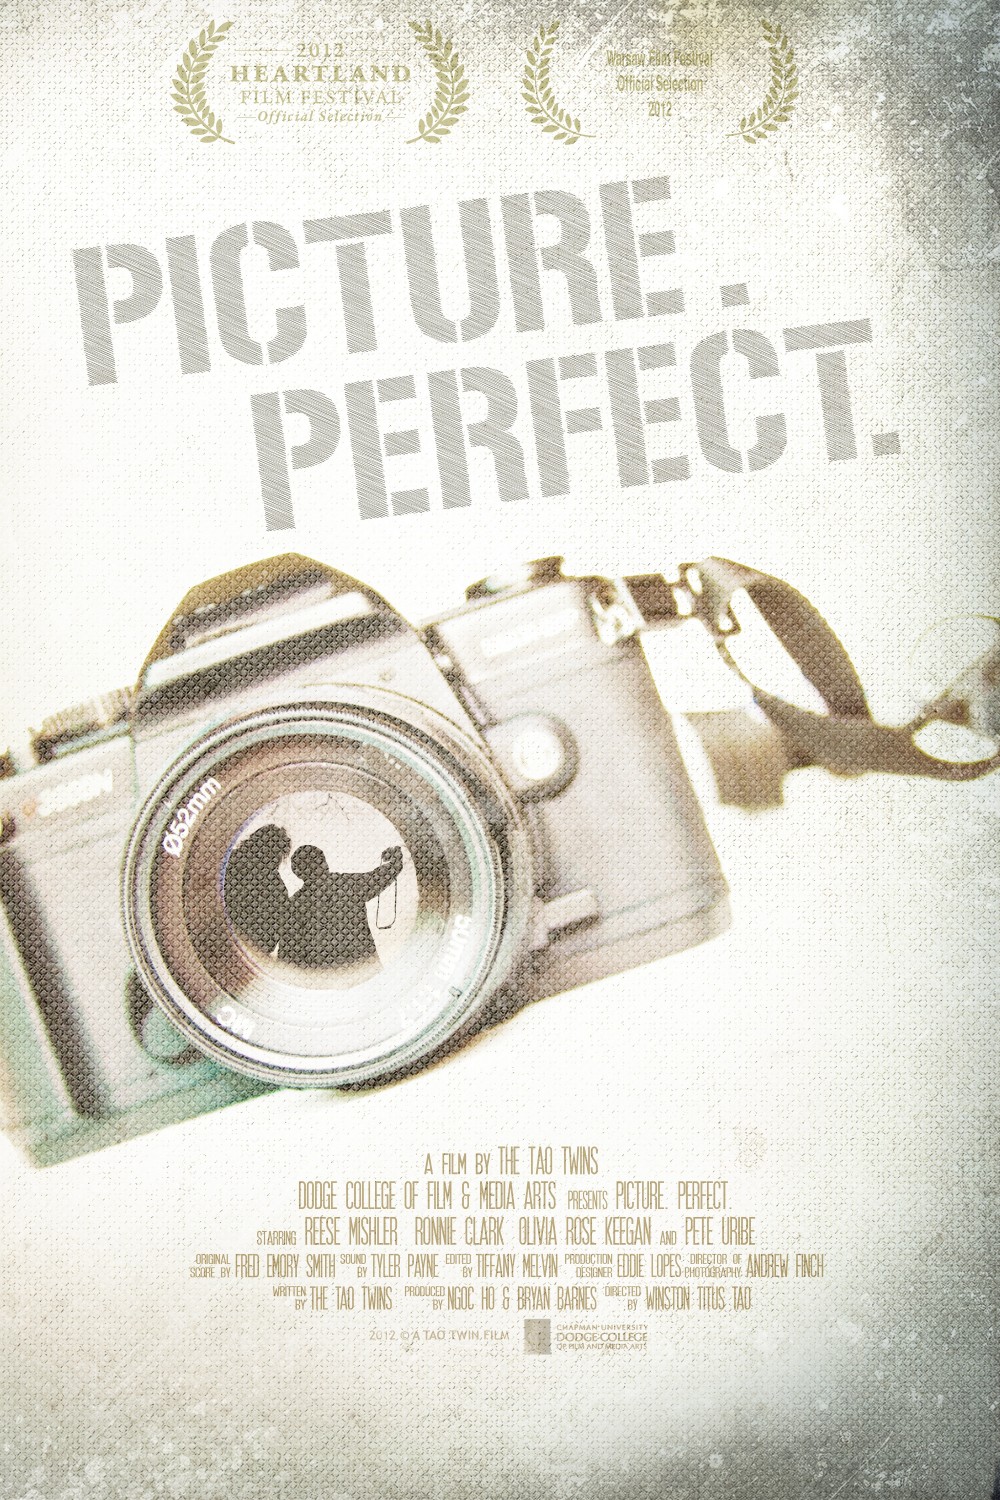 Extra Large Movie Poster Image for Picture. Perfect.